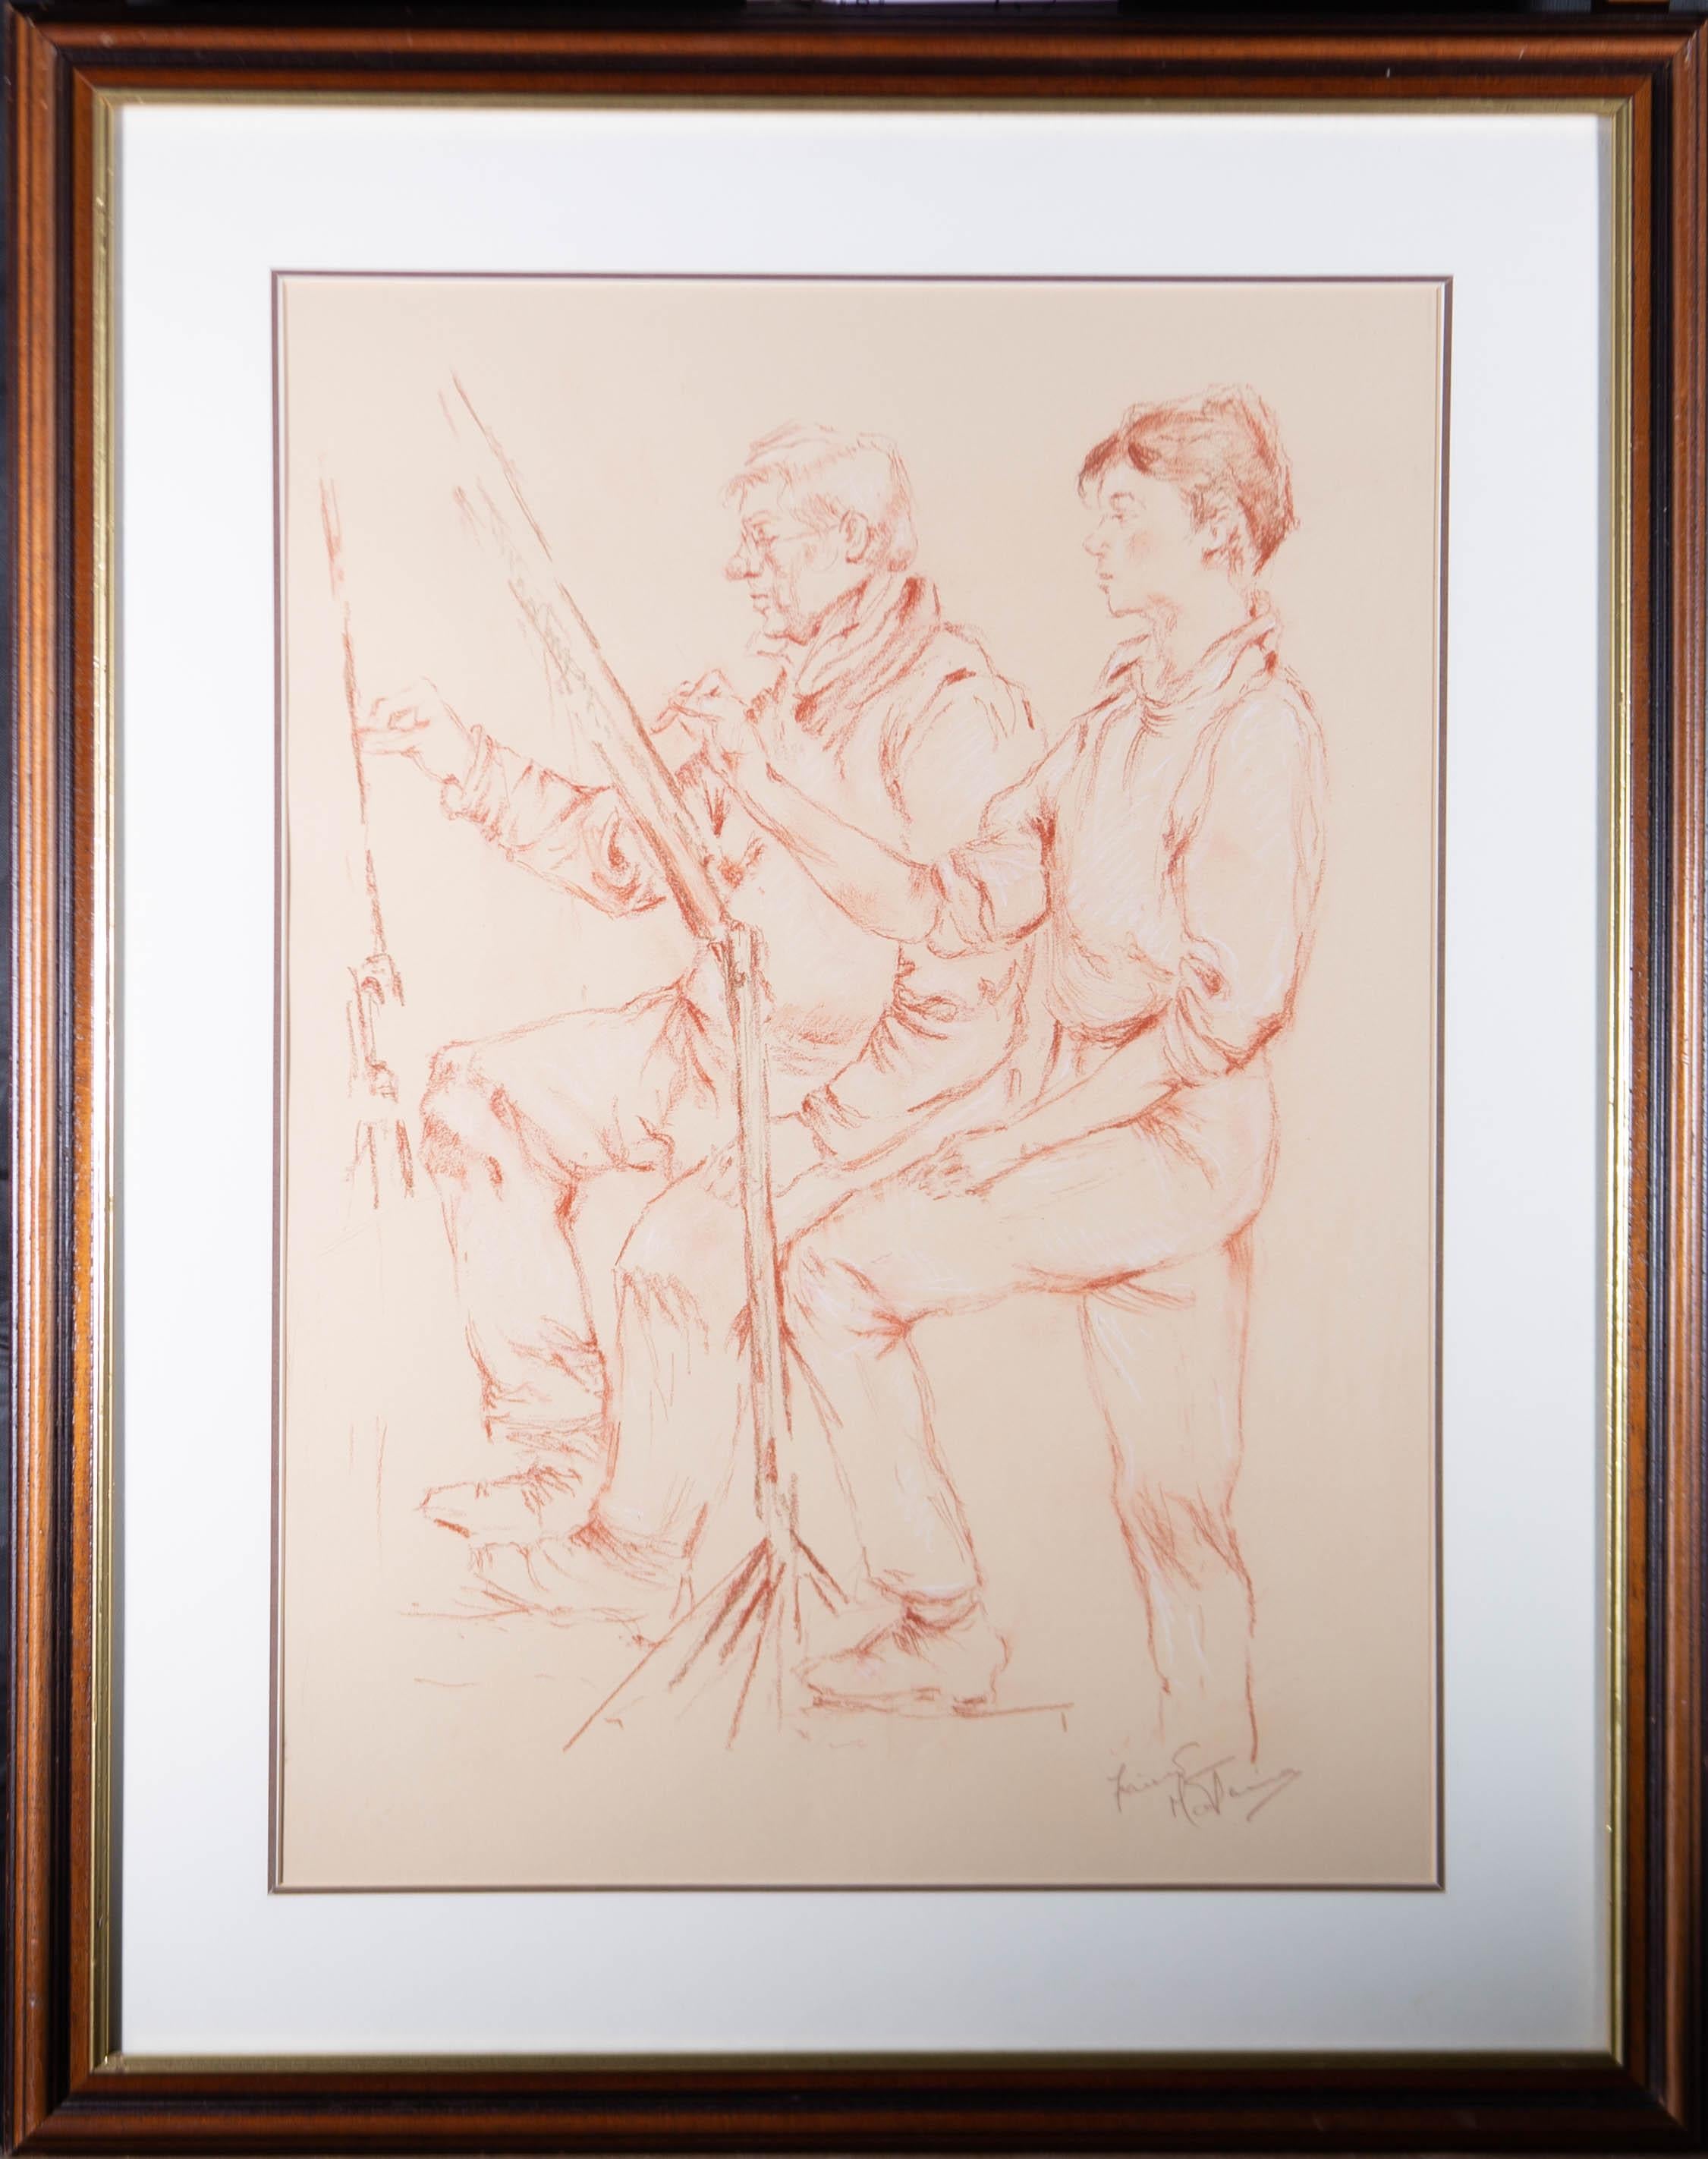 In this study, Matania has used terracotta-coloured chalk to depict two figures caught deep in the act of drawing. The artwork is signed in the lower left and is well presented in a wood frame with a gilded inner window and a white mount On wove.
